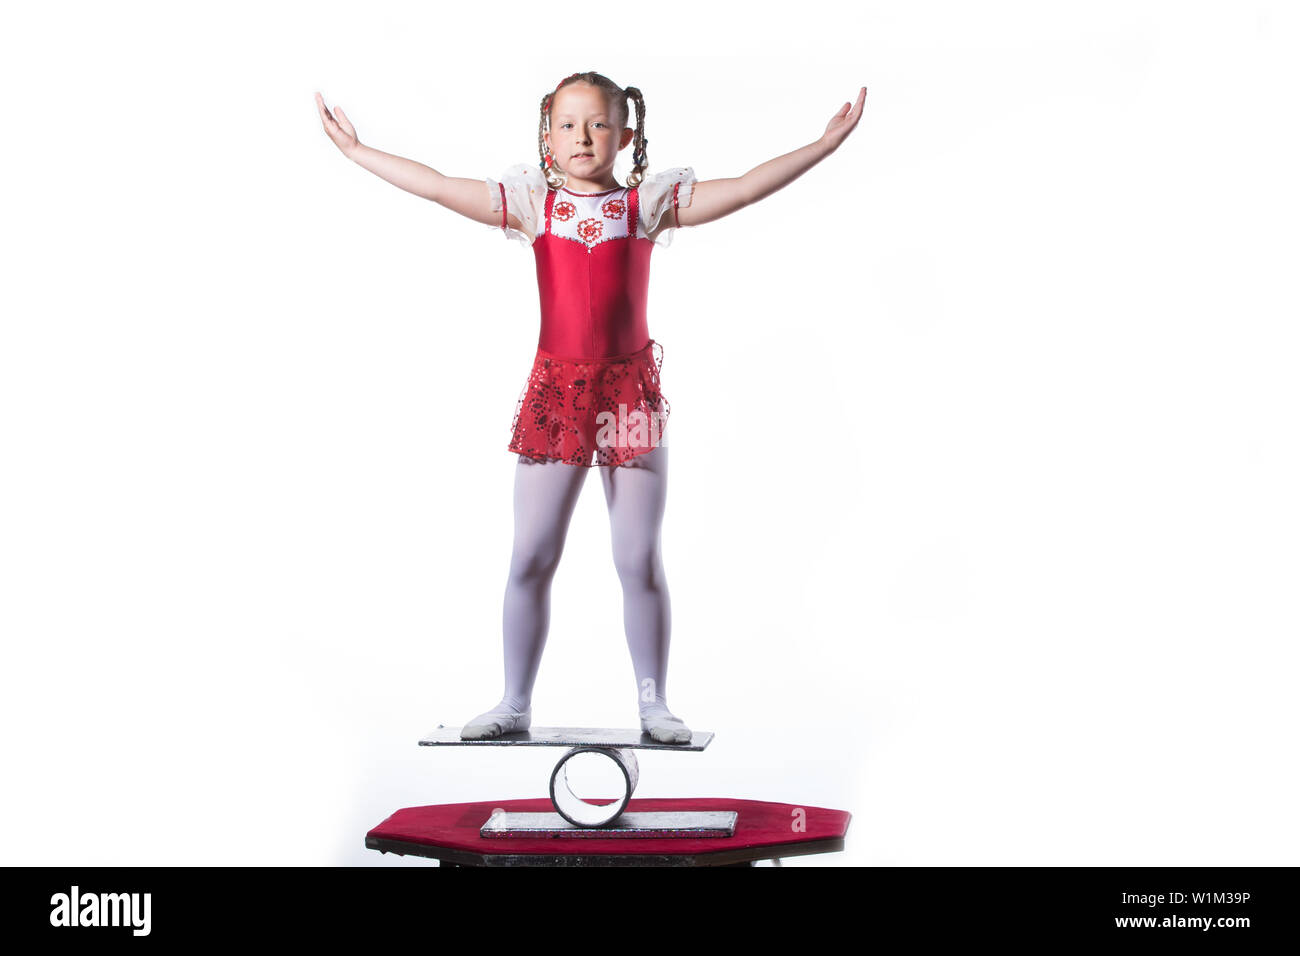 Little girl balancing act on white background.Young gymnast balancing actress Stock Photo